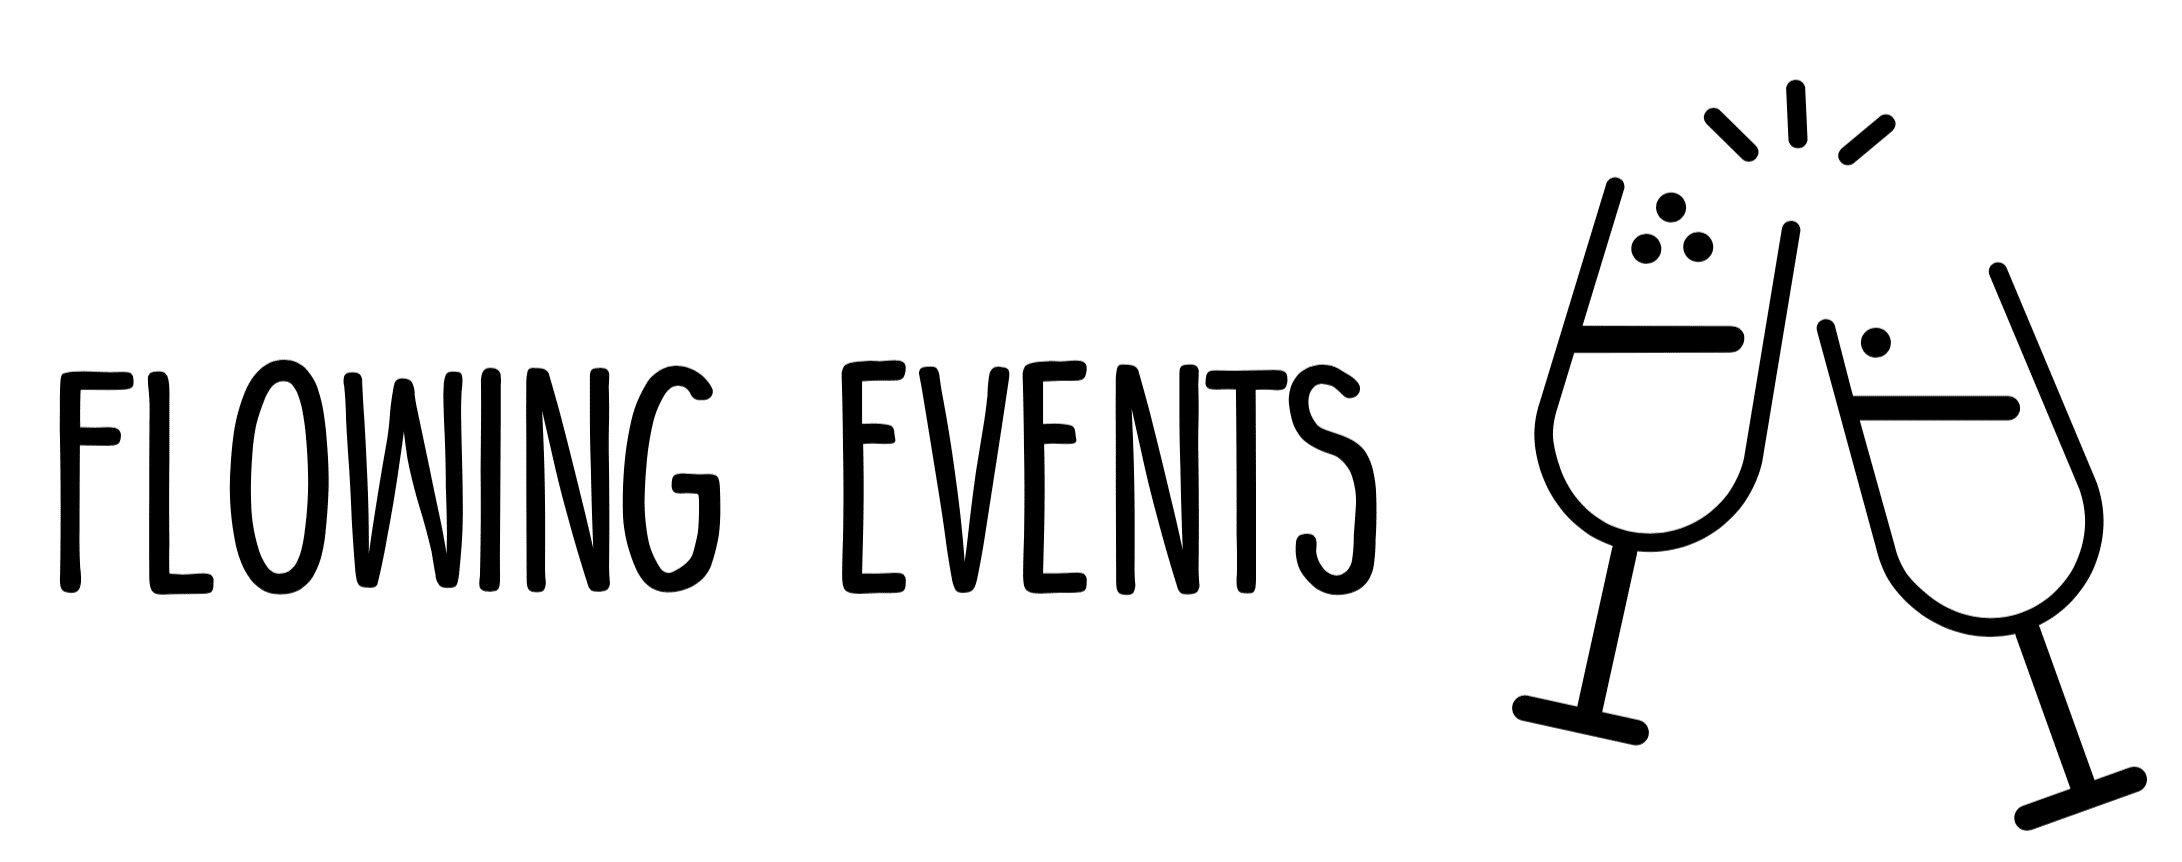 Flowing Events